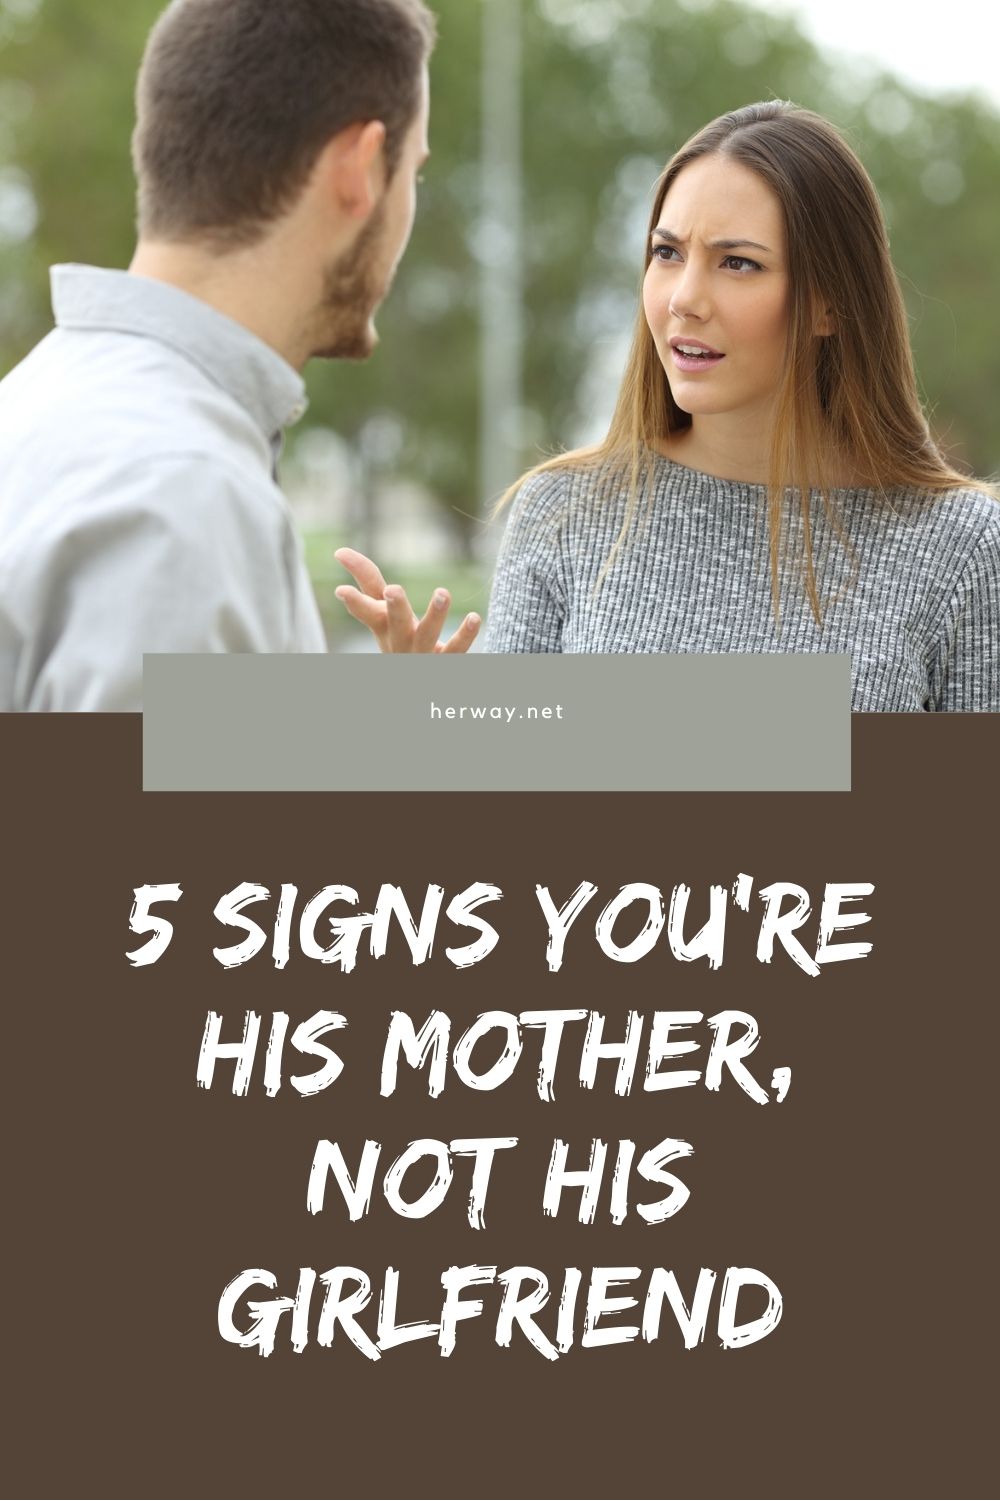 How To Be A Girlfriend Not A Mother?